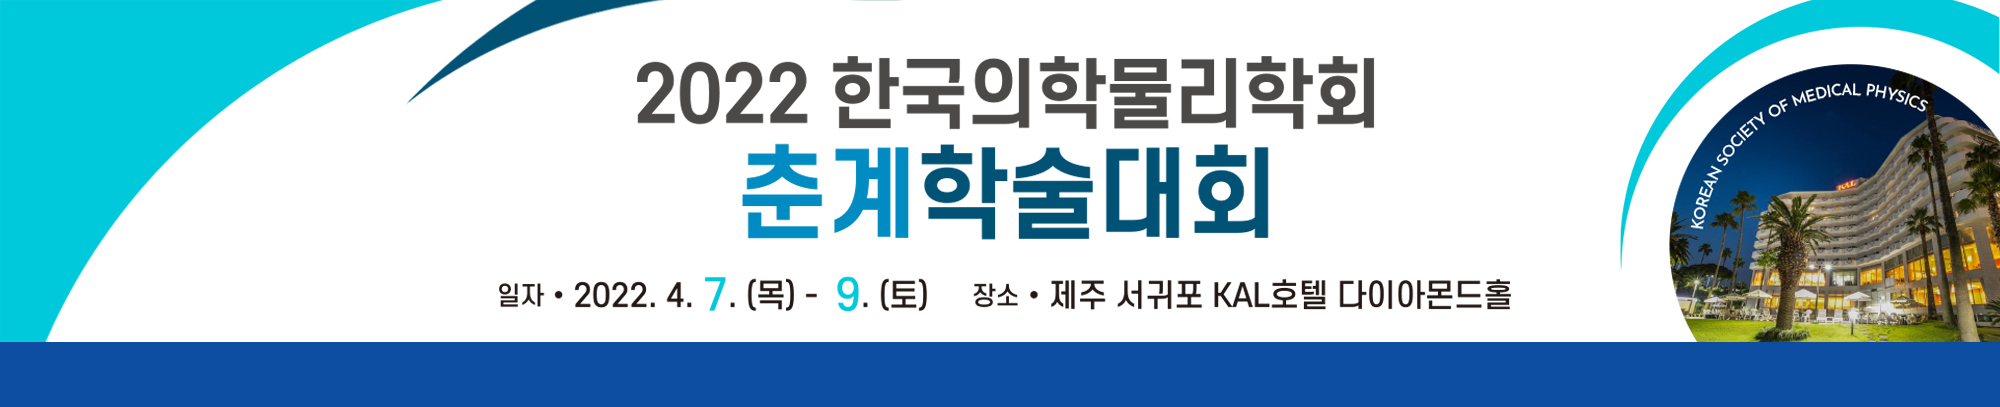 Korean Society of Medical Physics. Japan Society of Medical Physics. In conjunction with The 62nd Scienfitic Meeting of KSMP and The 122nd Scientific Meeting of JSMP. The 9th Korea-Japan Joint Meeting on Medical Physics. 2021 9.9 - 9.10 (THU ~ FRI) Virtual Meeting. Theme: Create the Futrue of Medical Physics Together.